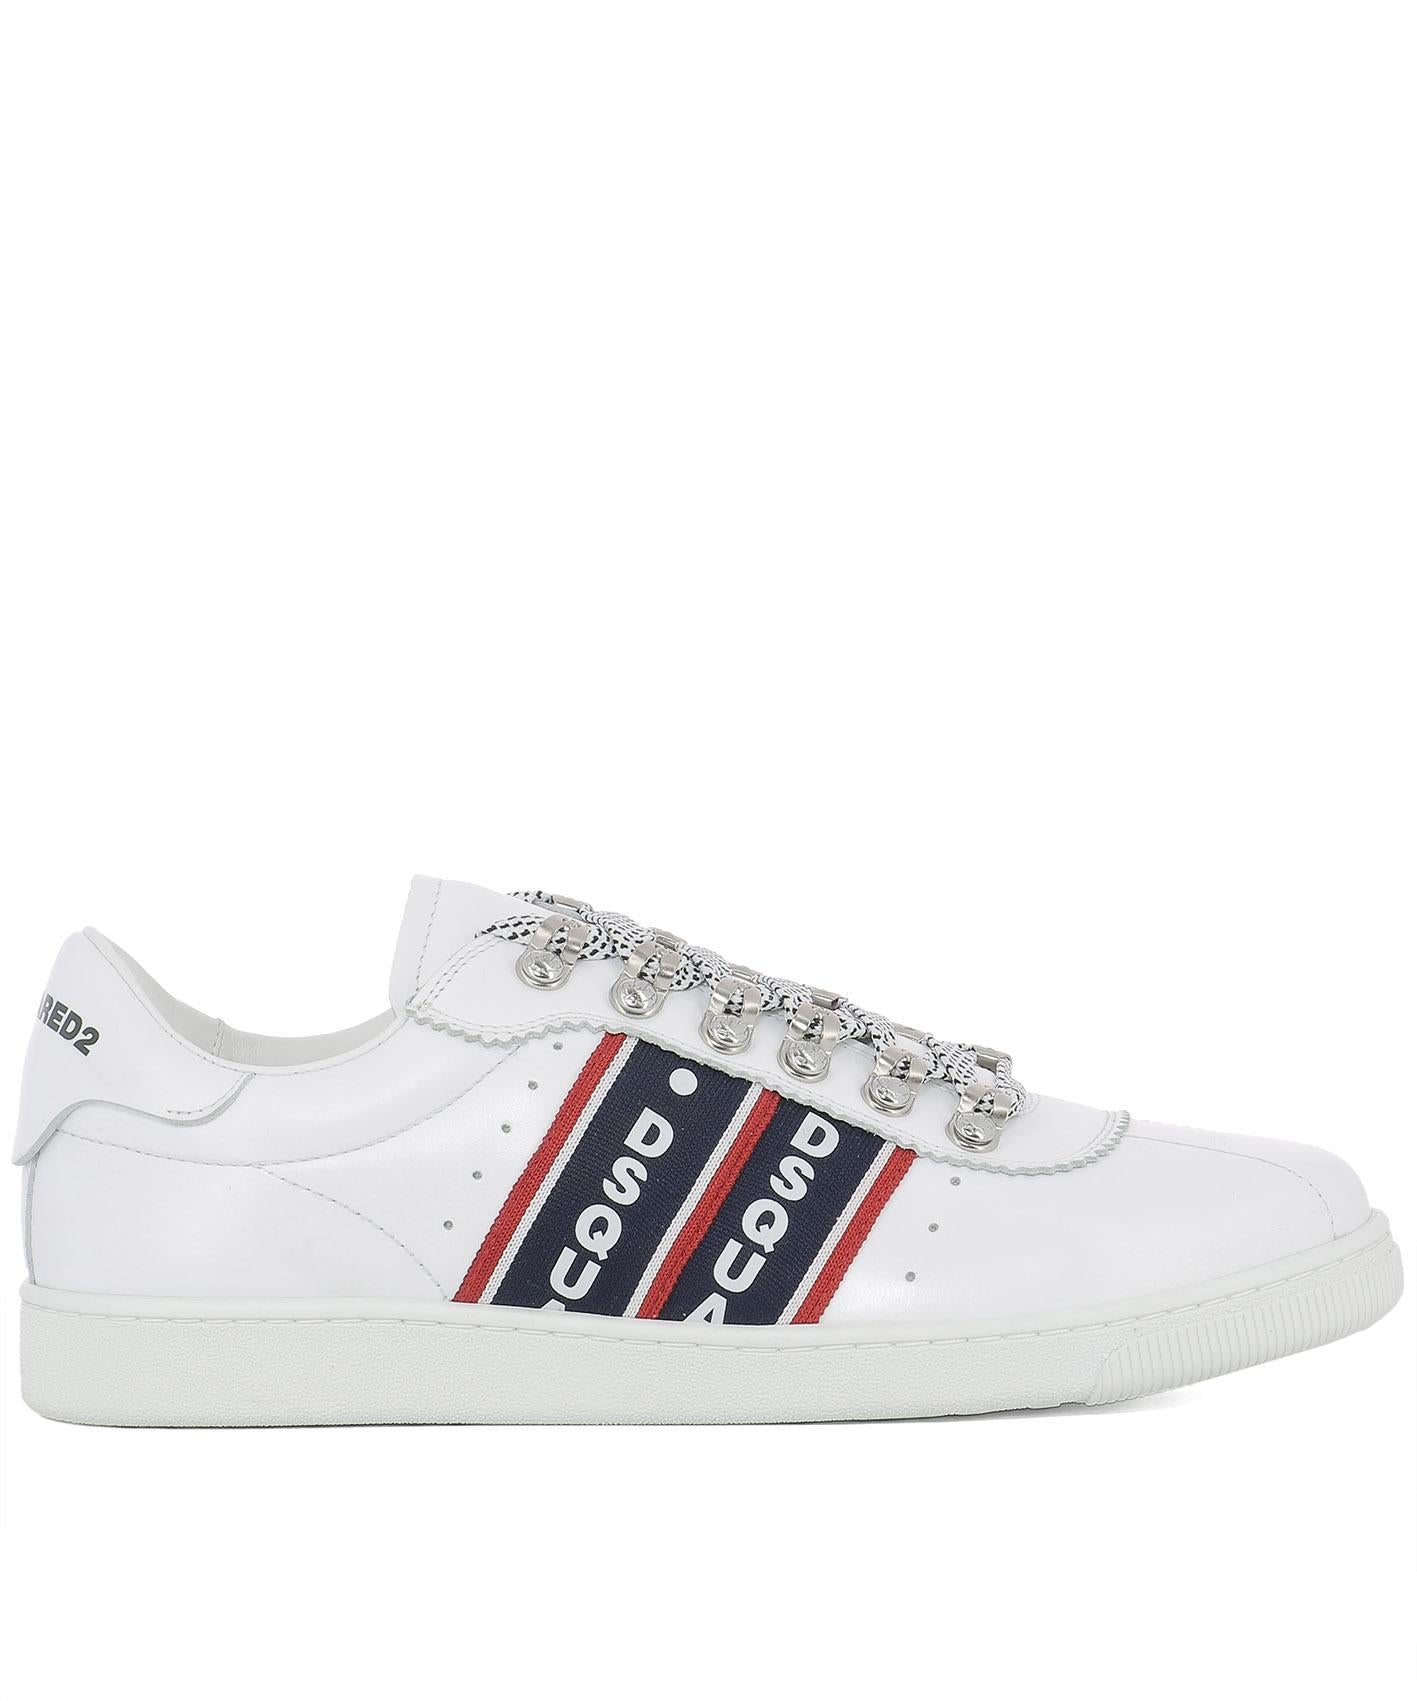 DSQUARED2 DSQUARED2 BARNEY LOGO STRIPES trainers